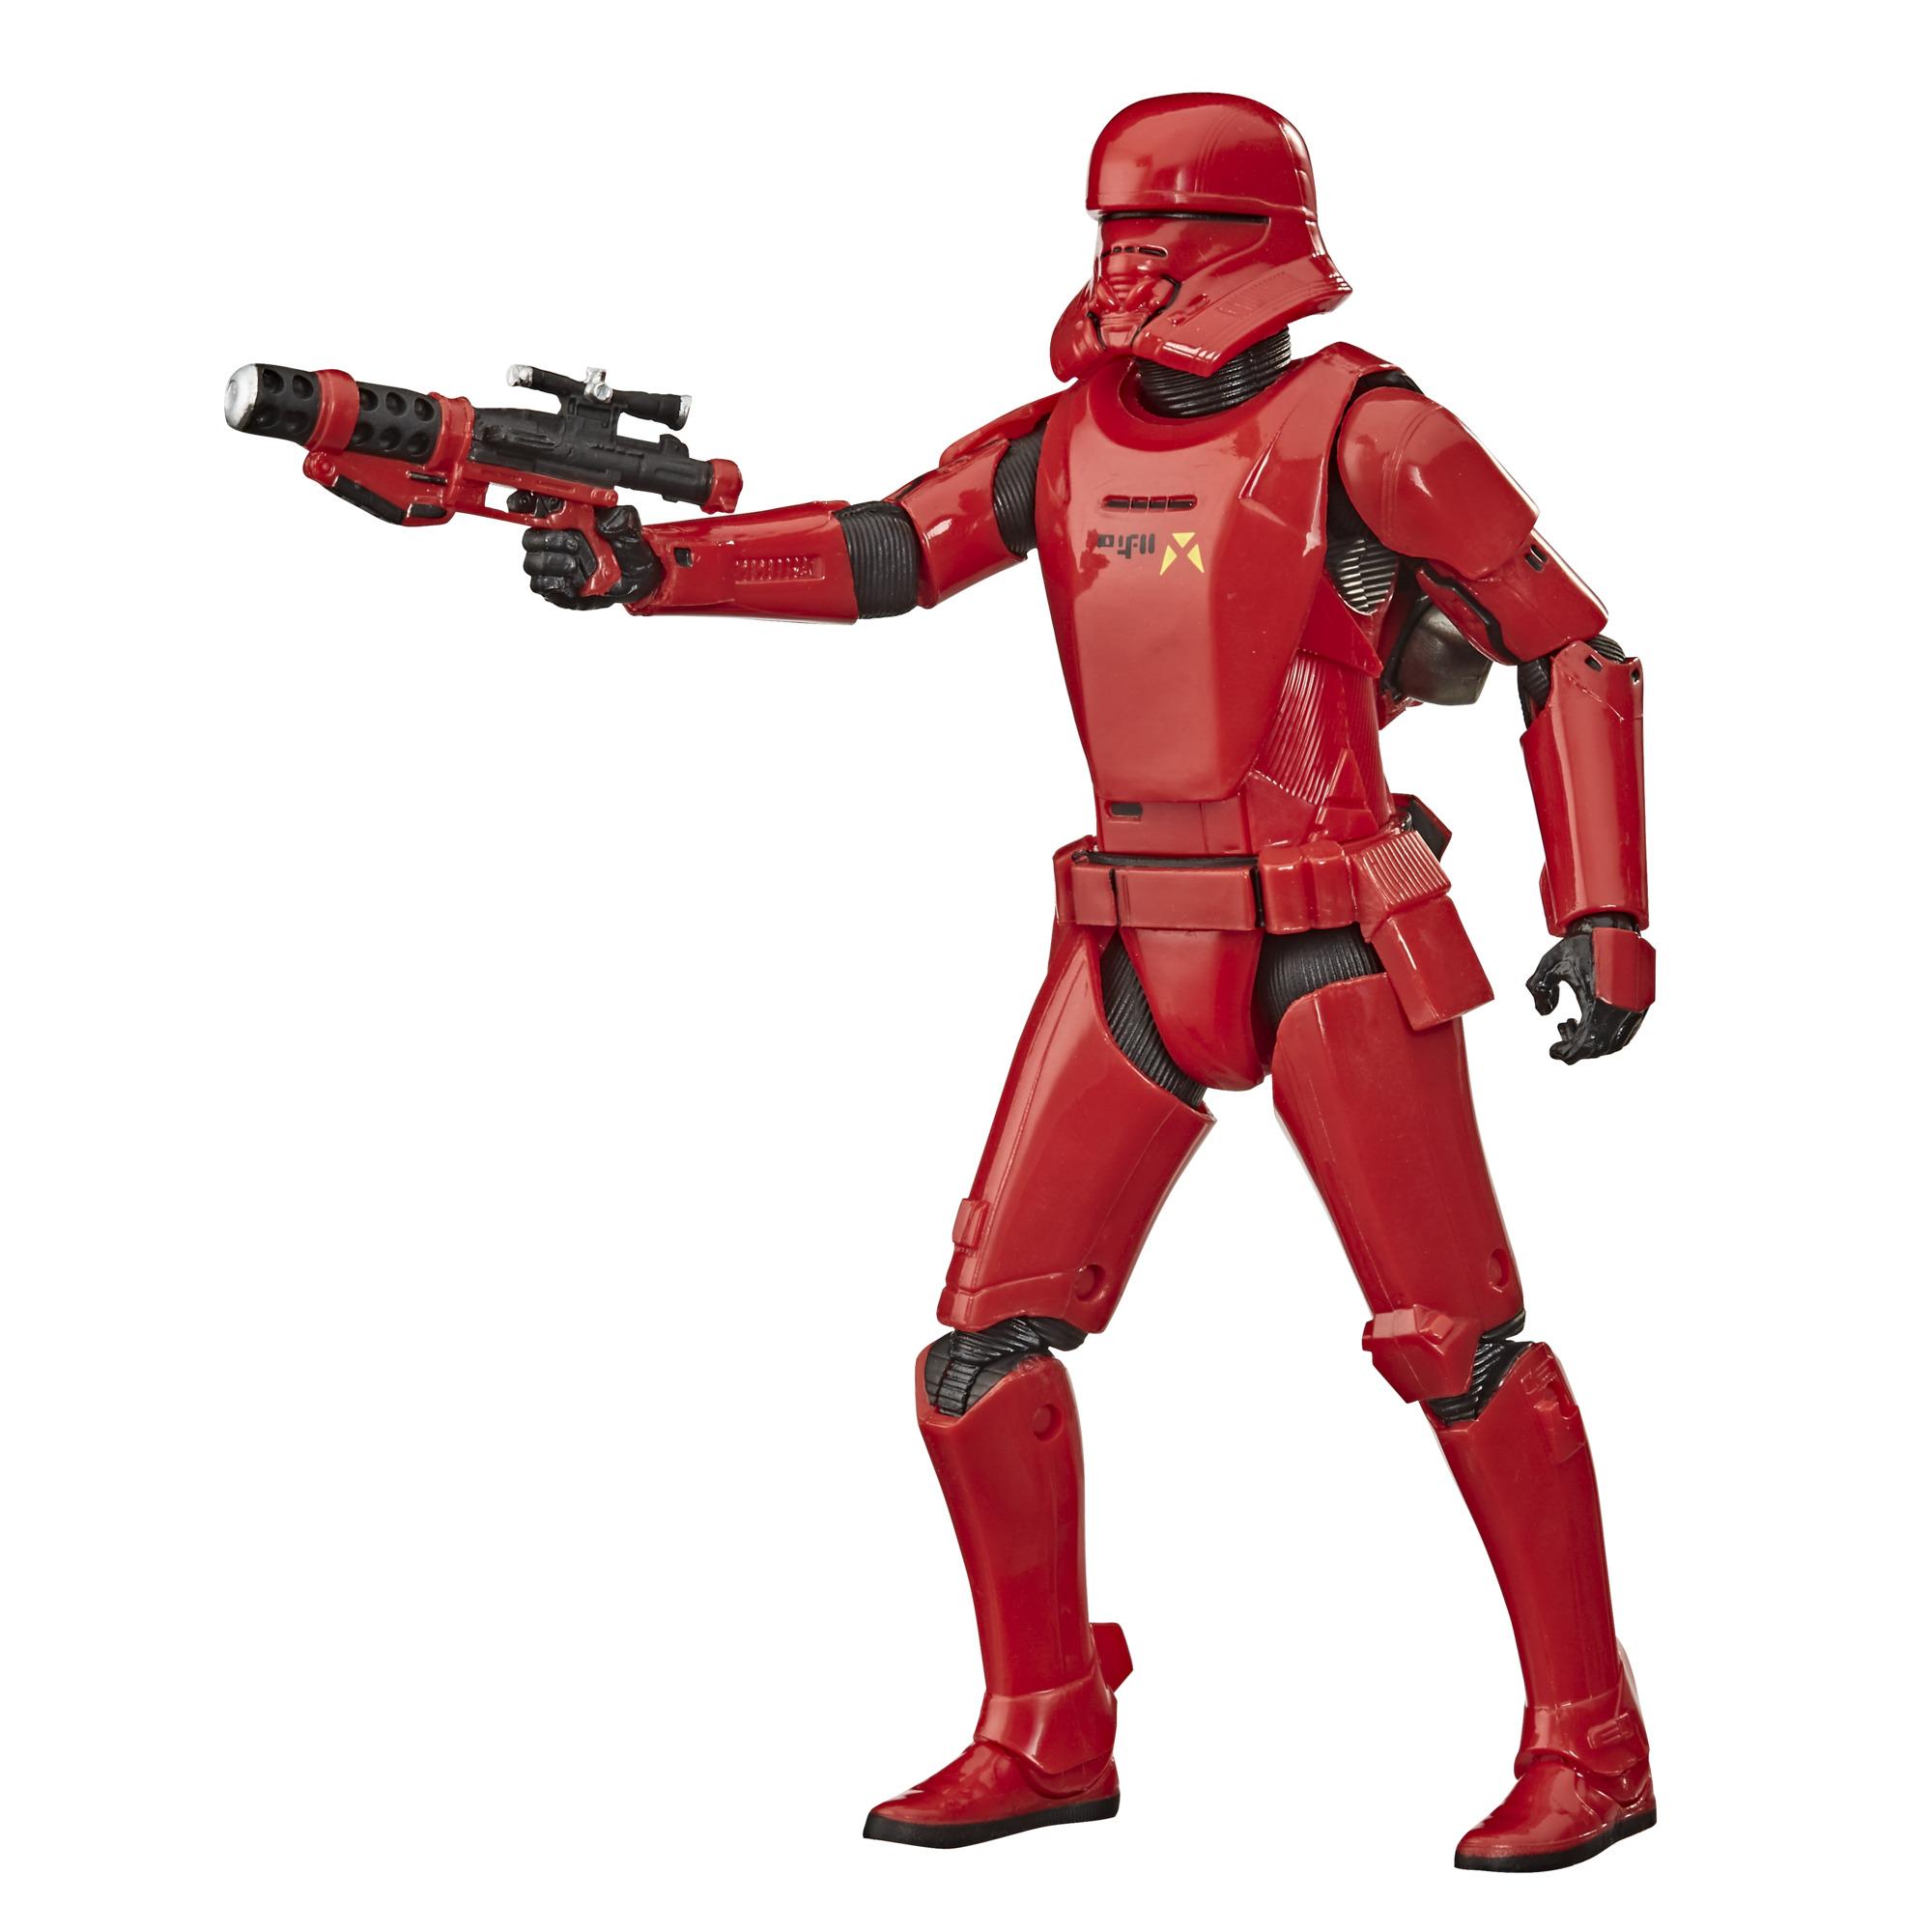 Hasbro Star Wars The Black Series Sith Jet Trooper Toy 6-inch Scale Star Wars The Rise of Skywalker Action Figure for sale online